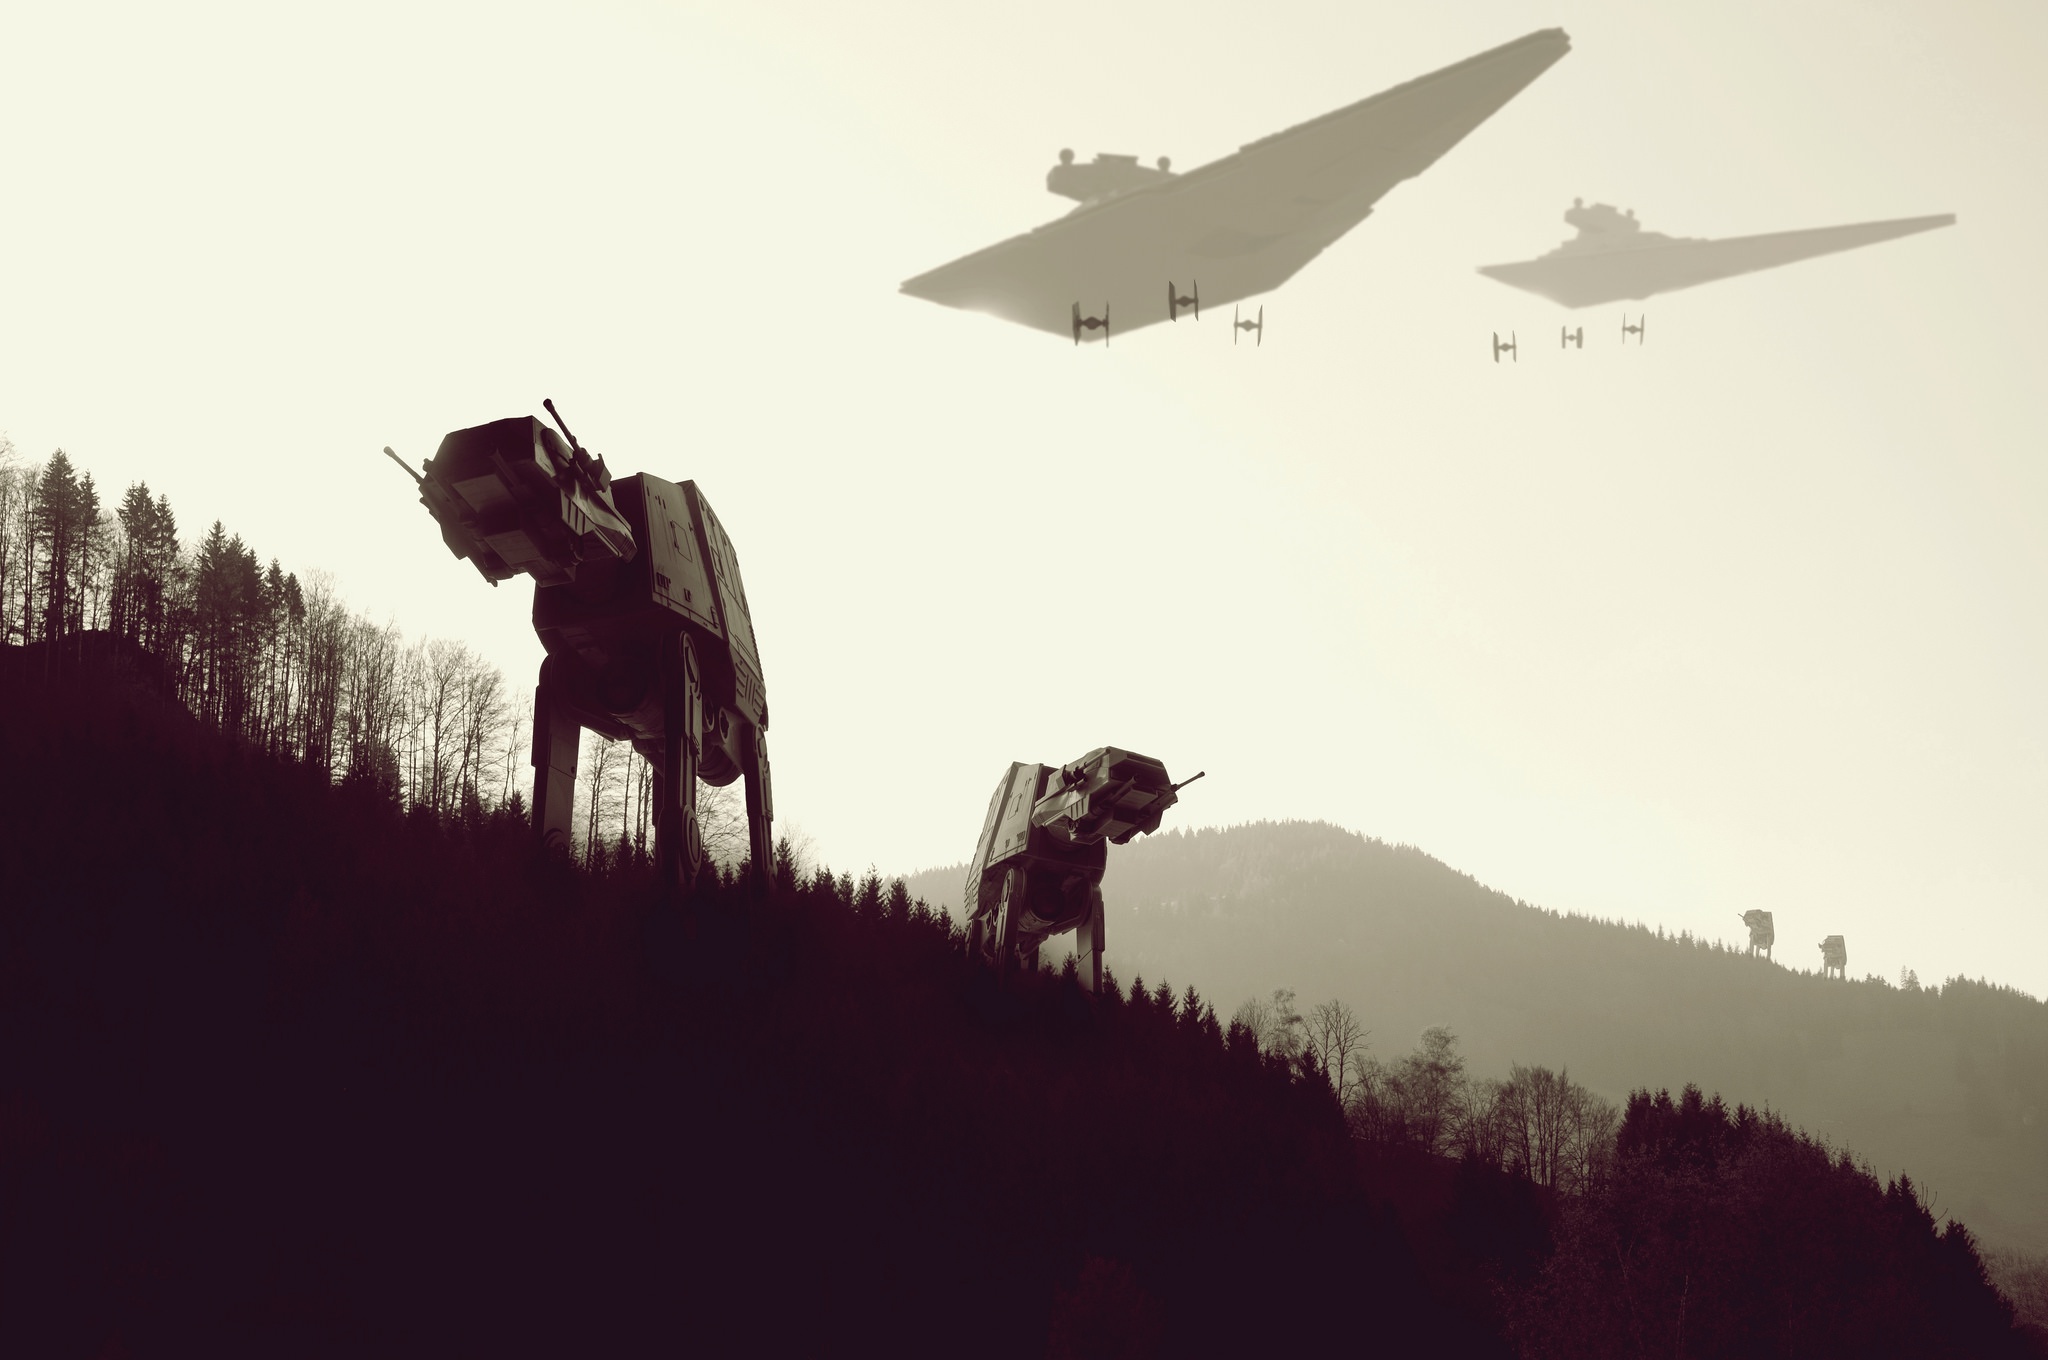 Star Wars Monochrome AT AT Walker Star Destroyer Imperial Forces AT AT Science Fiction Digital Art 2048x1360